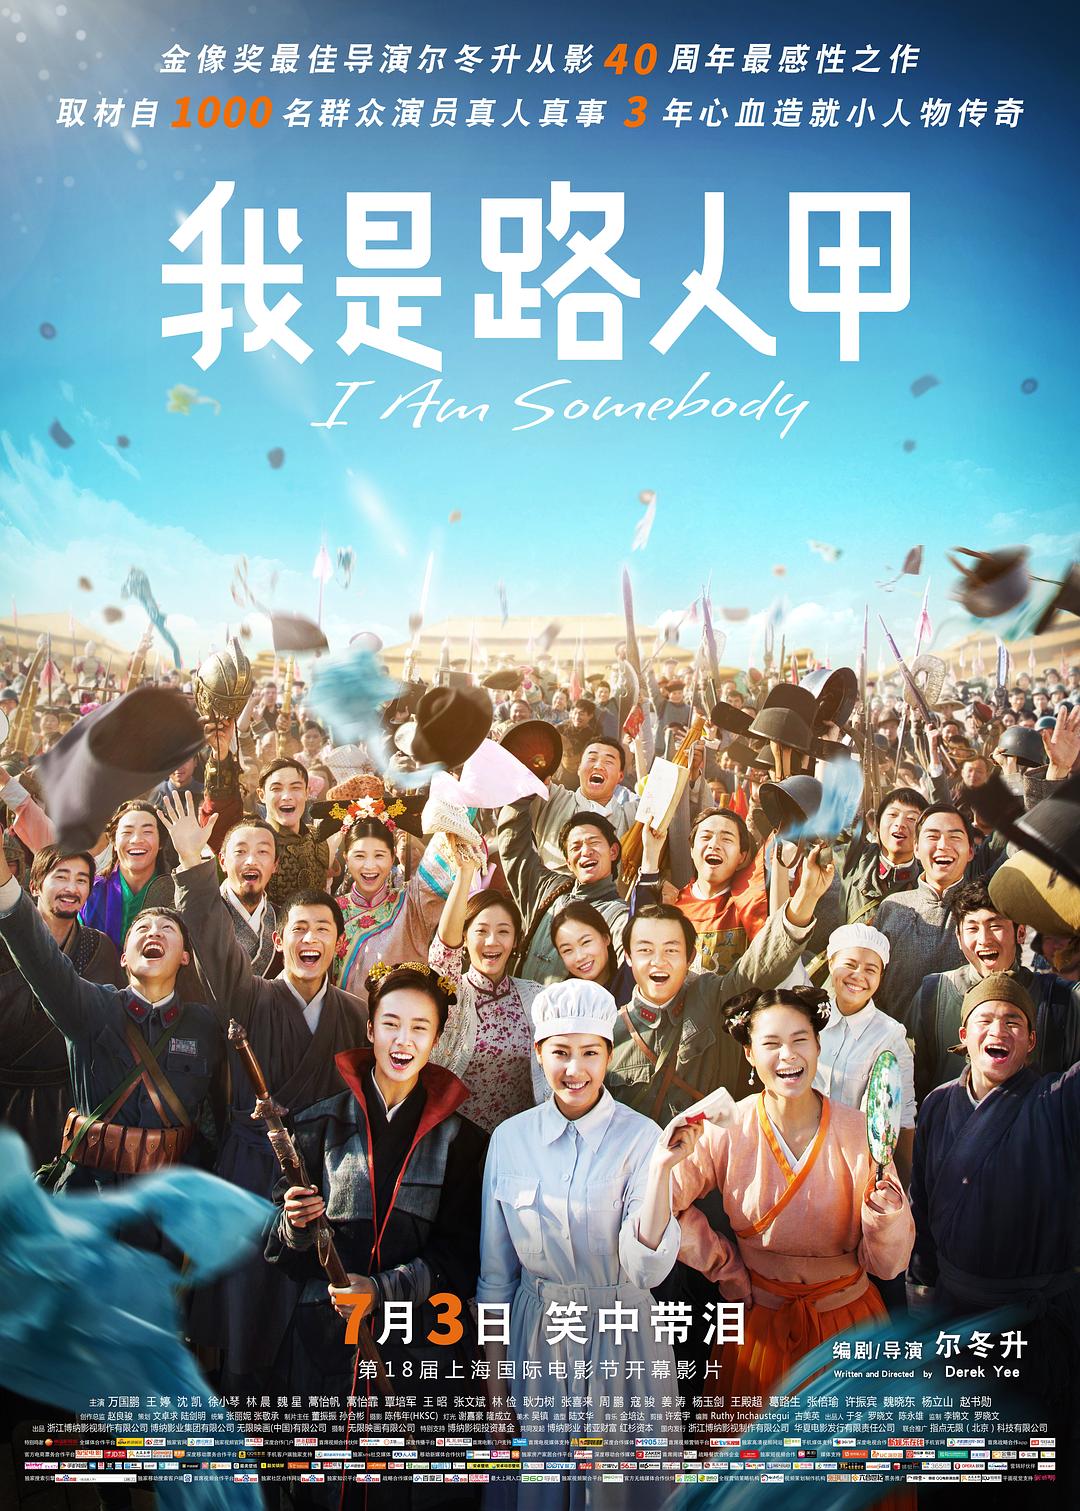 ·˼ I.Am.Somebody.2015.CHINESE.1080p.BluRay.x264.DTS-EPiC 9.38GB-1.png